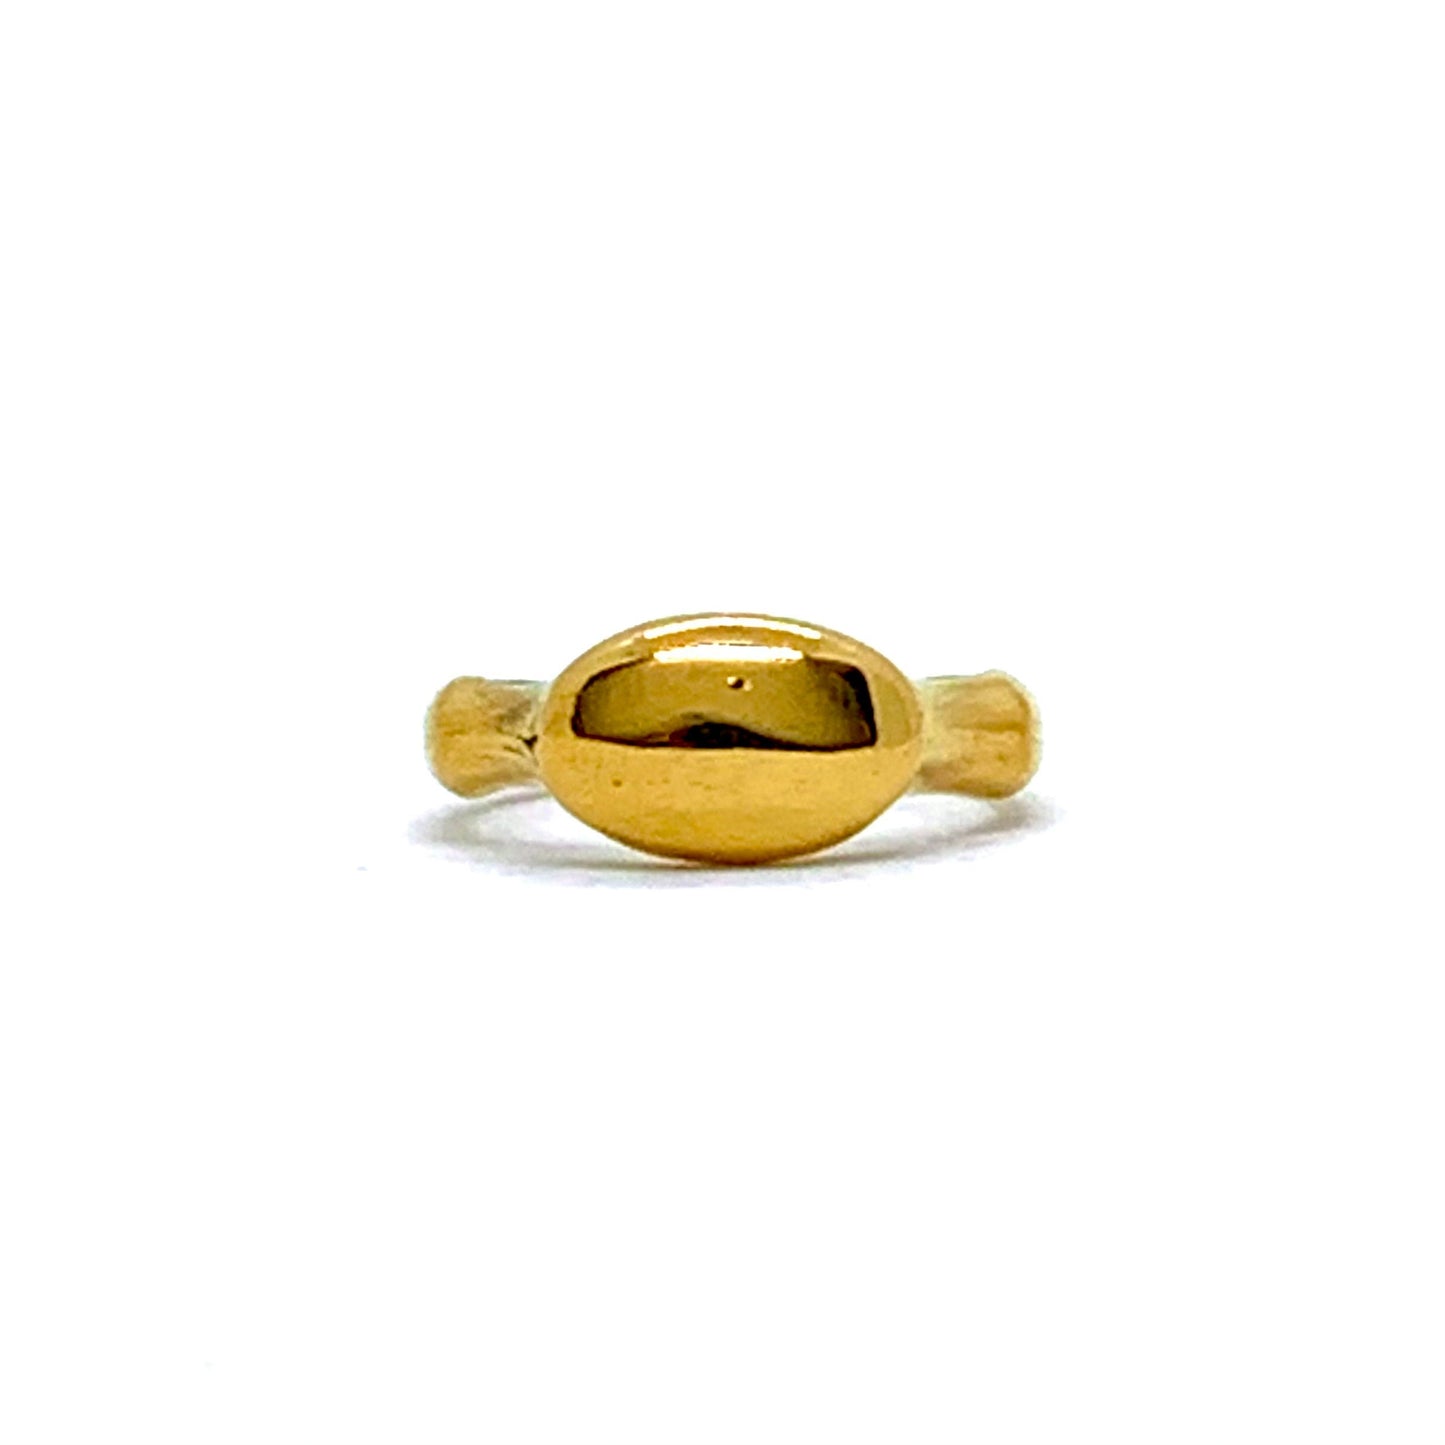 Ring 24ct Pure Gold Shiny 'PURE'  Collection